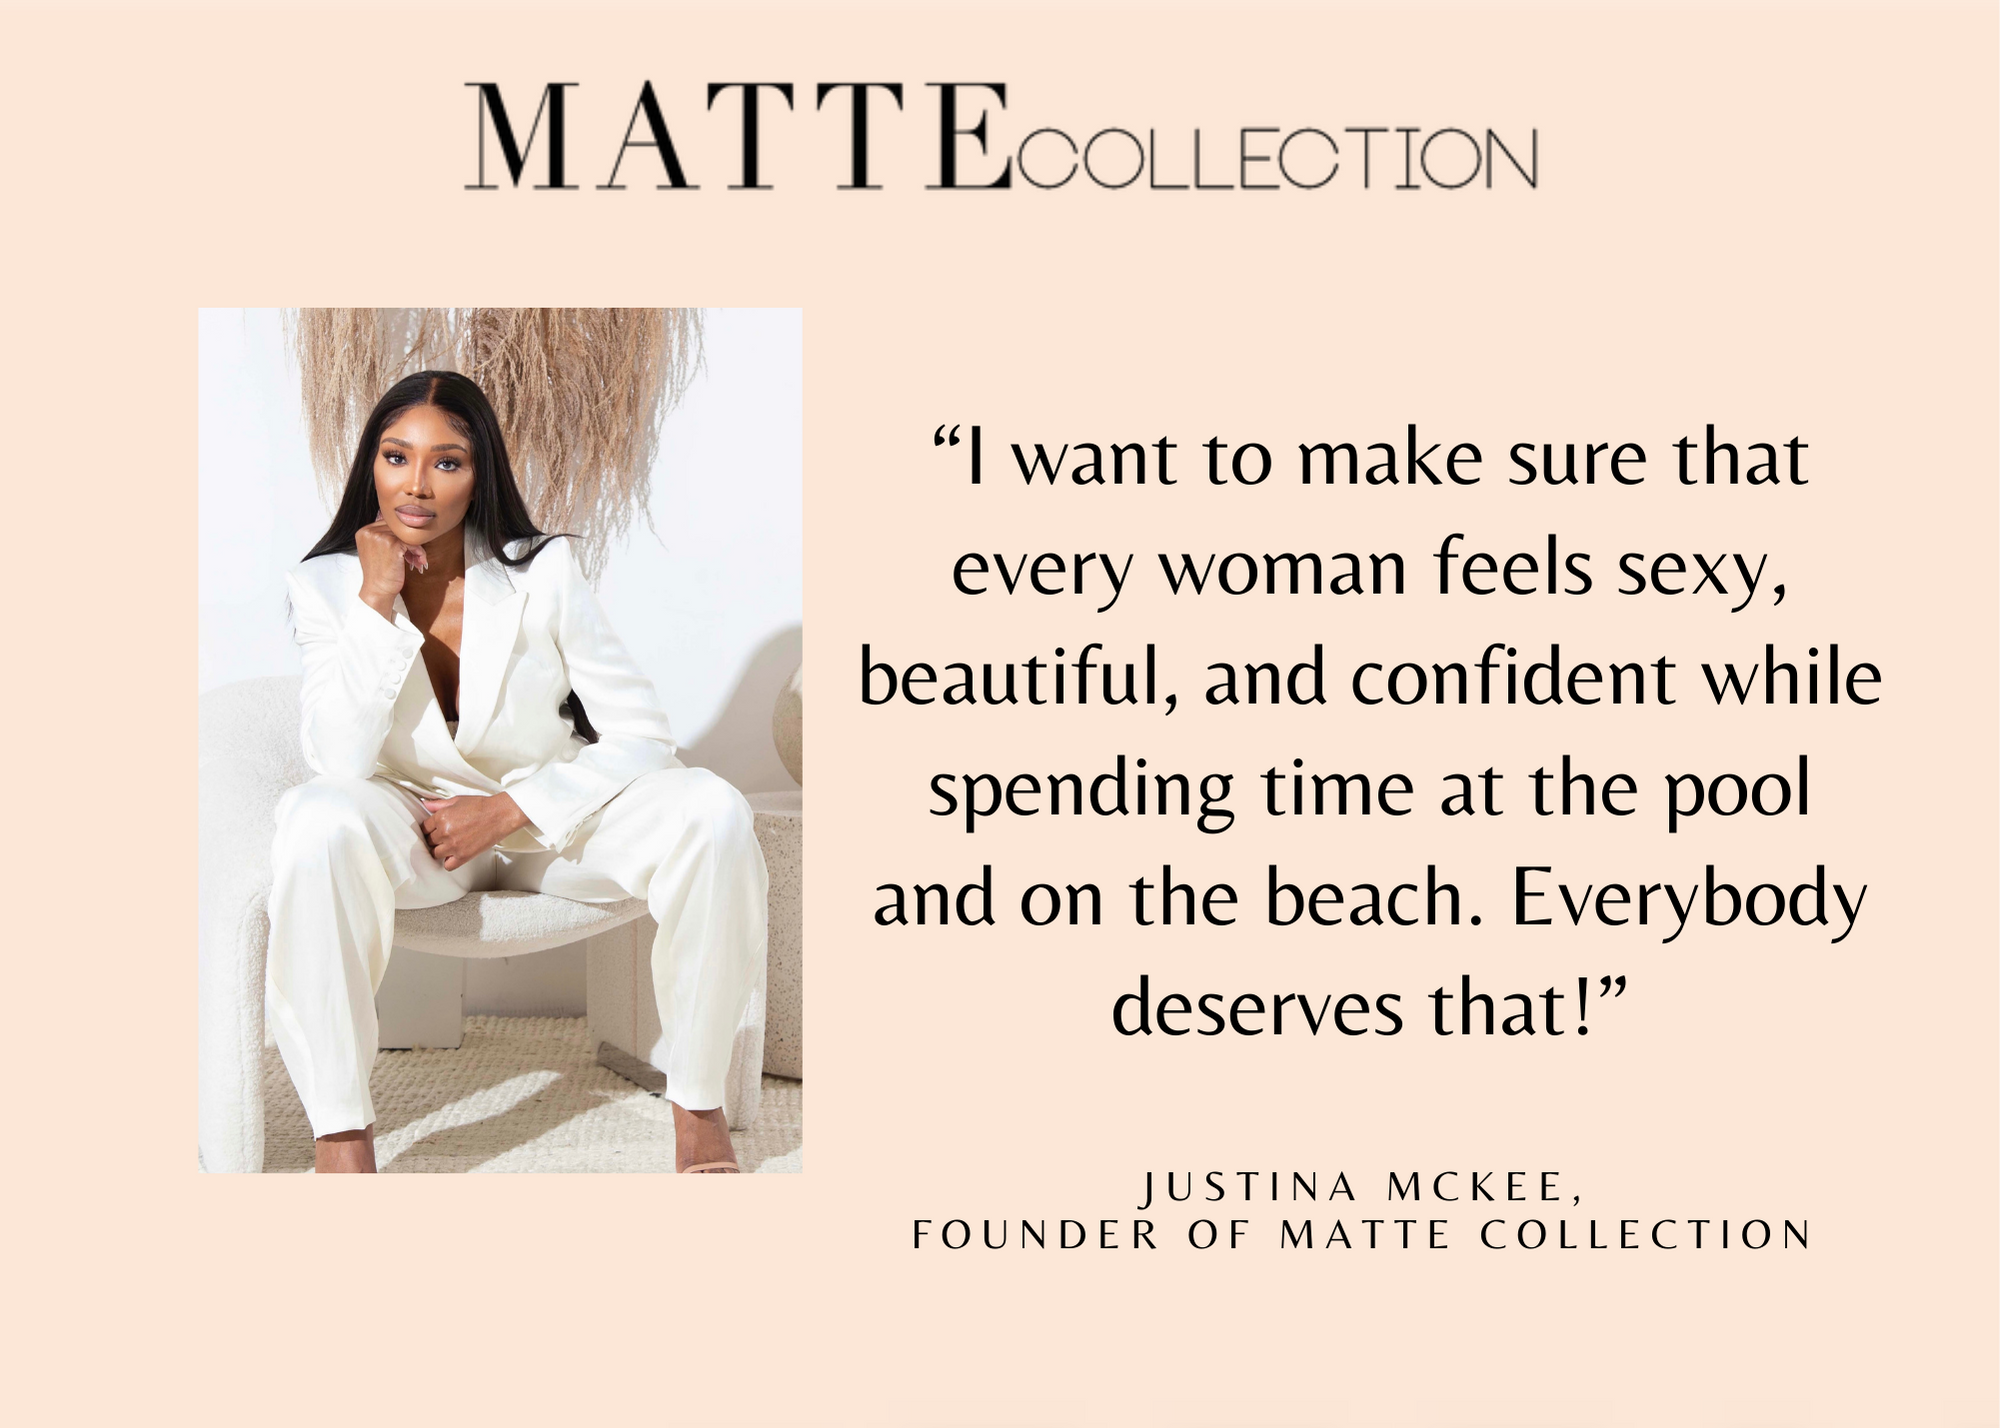 Matte Collection, Thursday, July 14, 2022, Press release picture